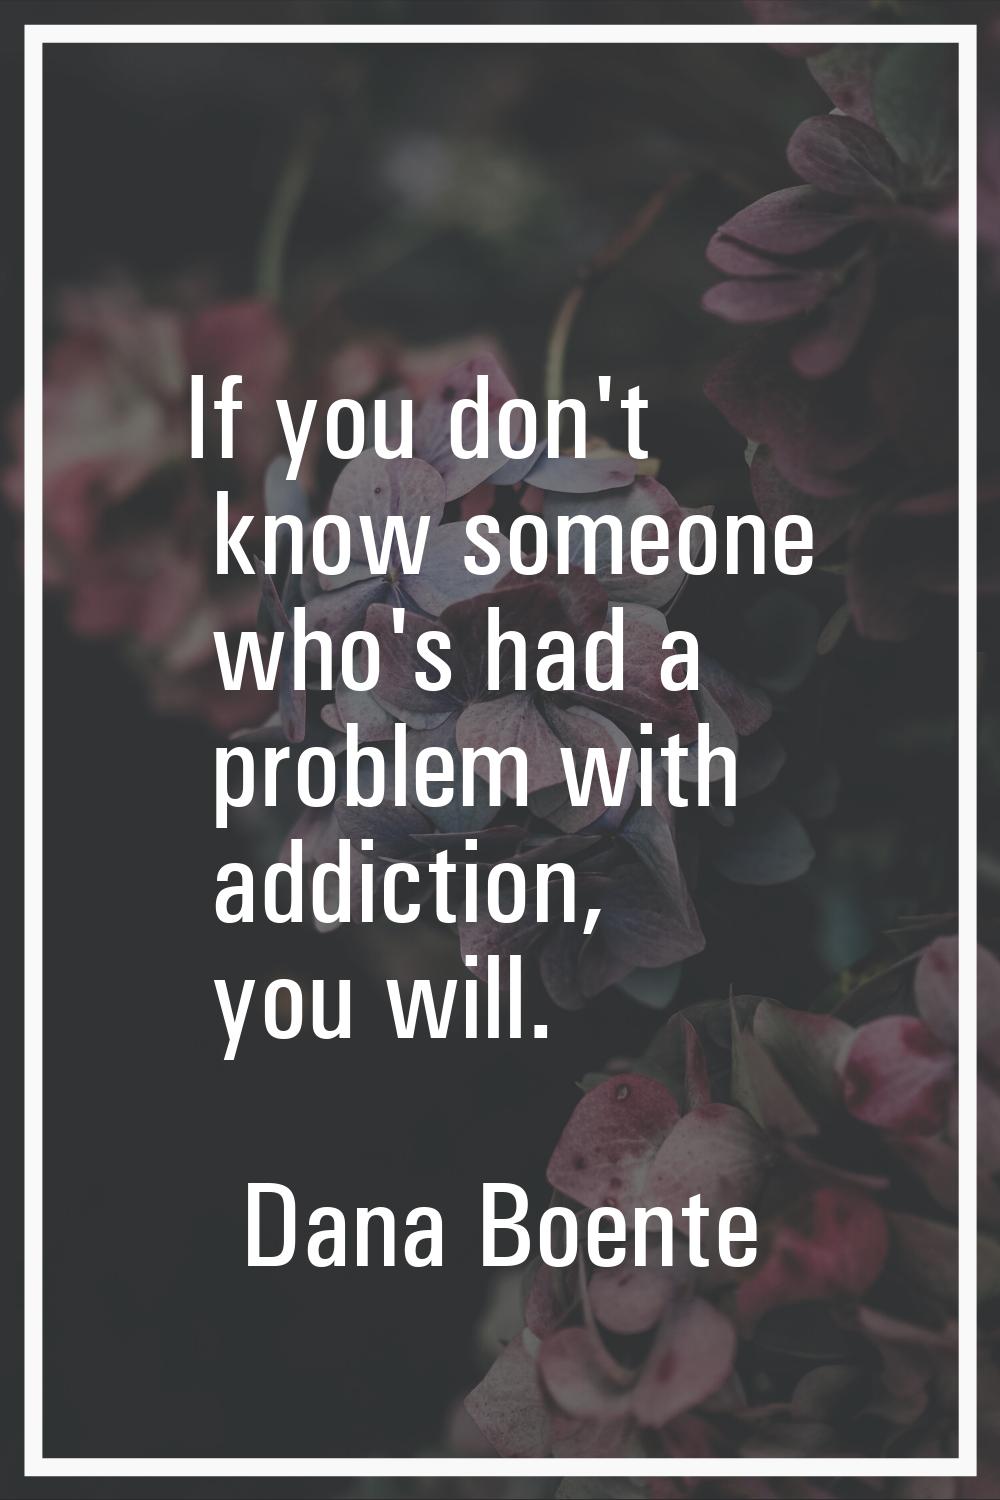 If you don't know someone who's had a problem with addiction, you will.